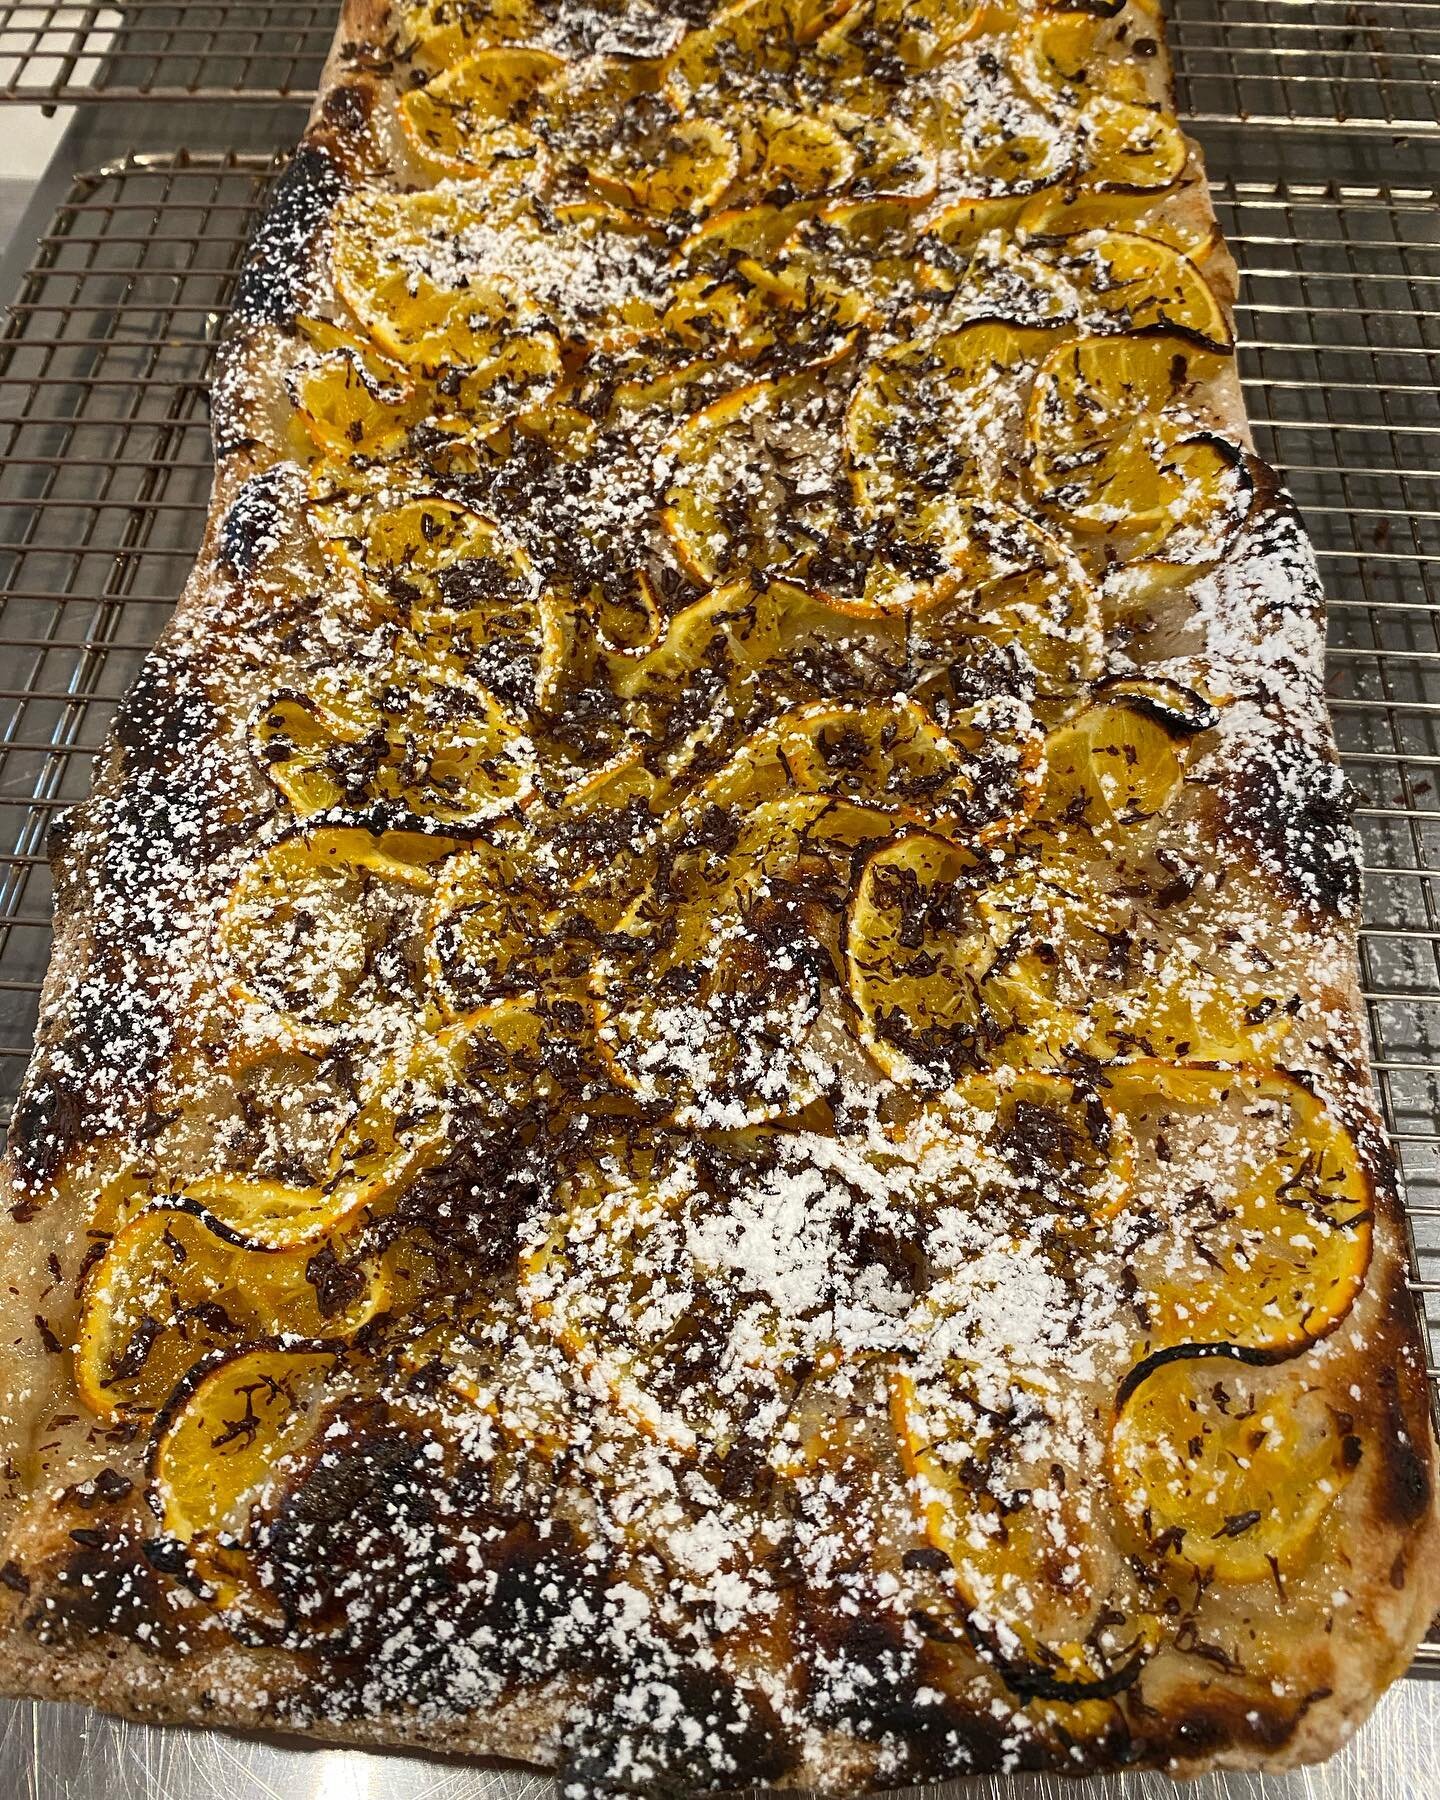 Special Christmas dessert pizza on special today, slices only!

Orange marmalade base, with caramalized oranges, shaved dark chocolate and icing sugar on top 🤤

Come grab a gift card and try a slice!